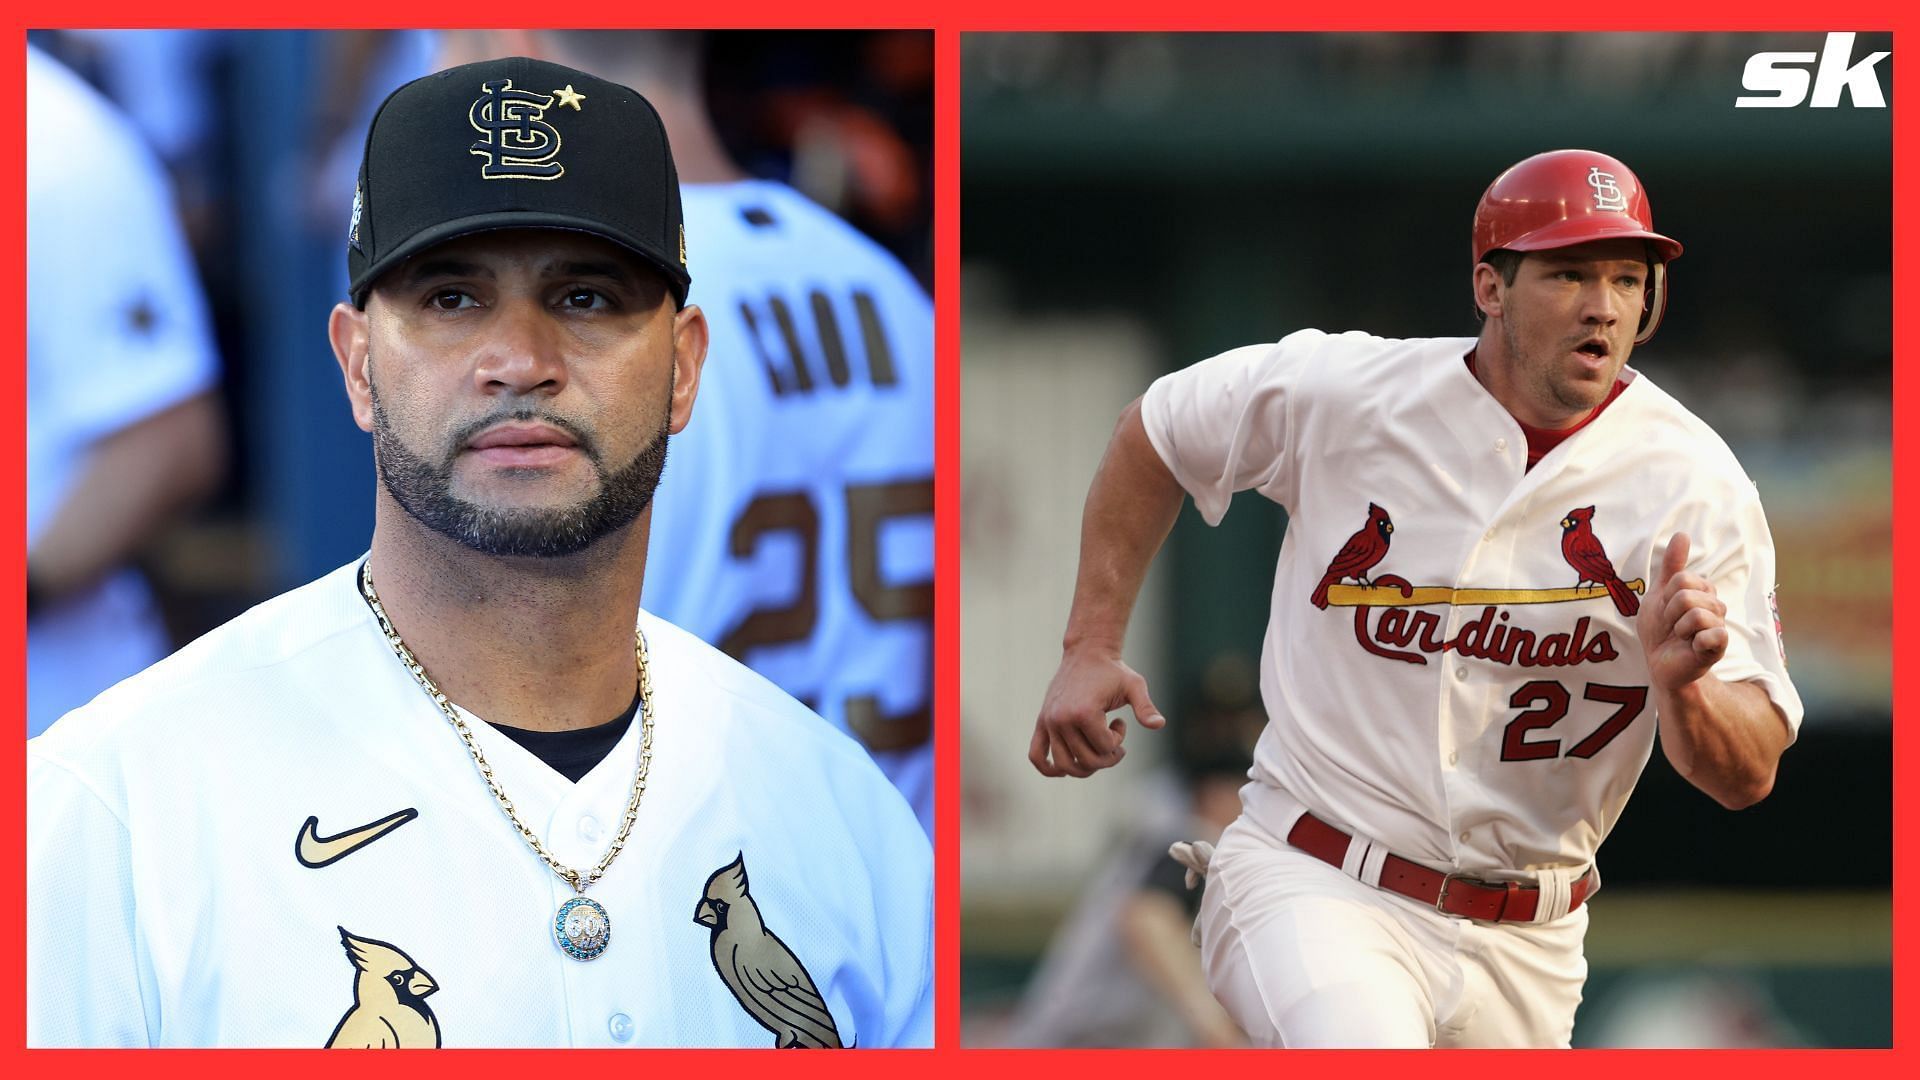 Which St. Louis Cardinals players have won the Gold Glove